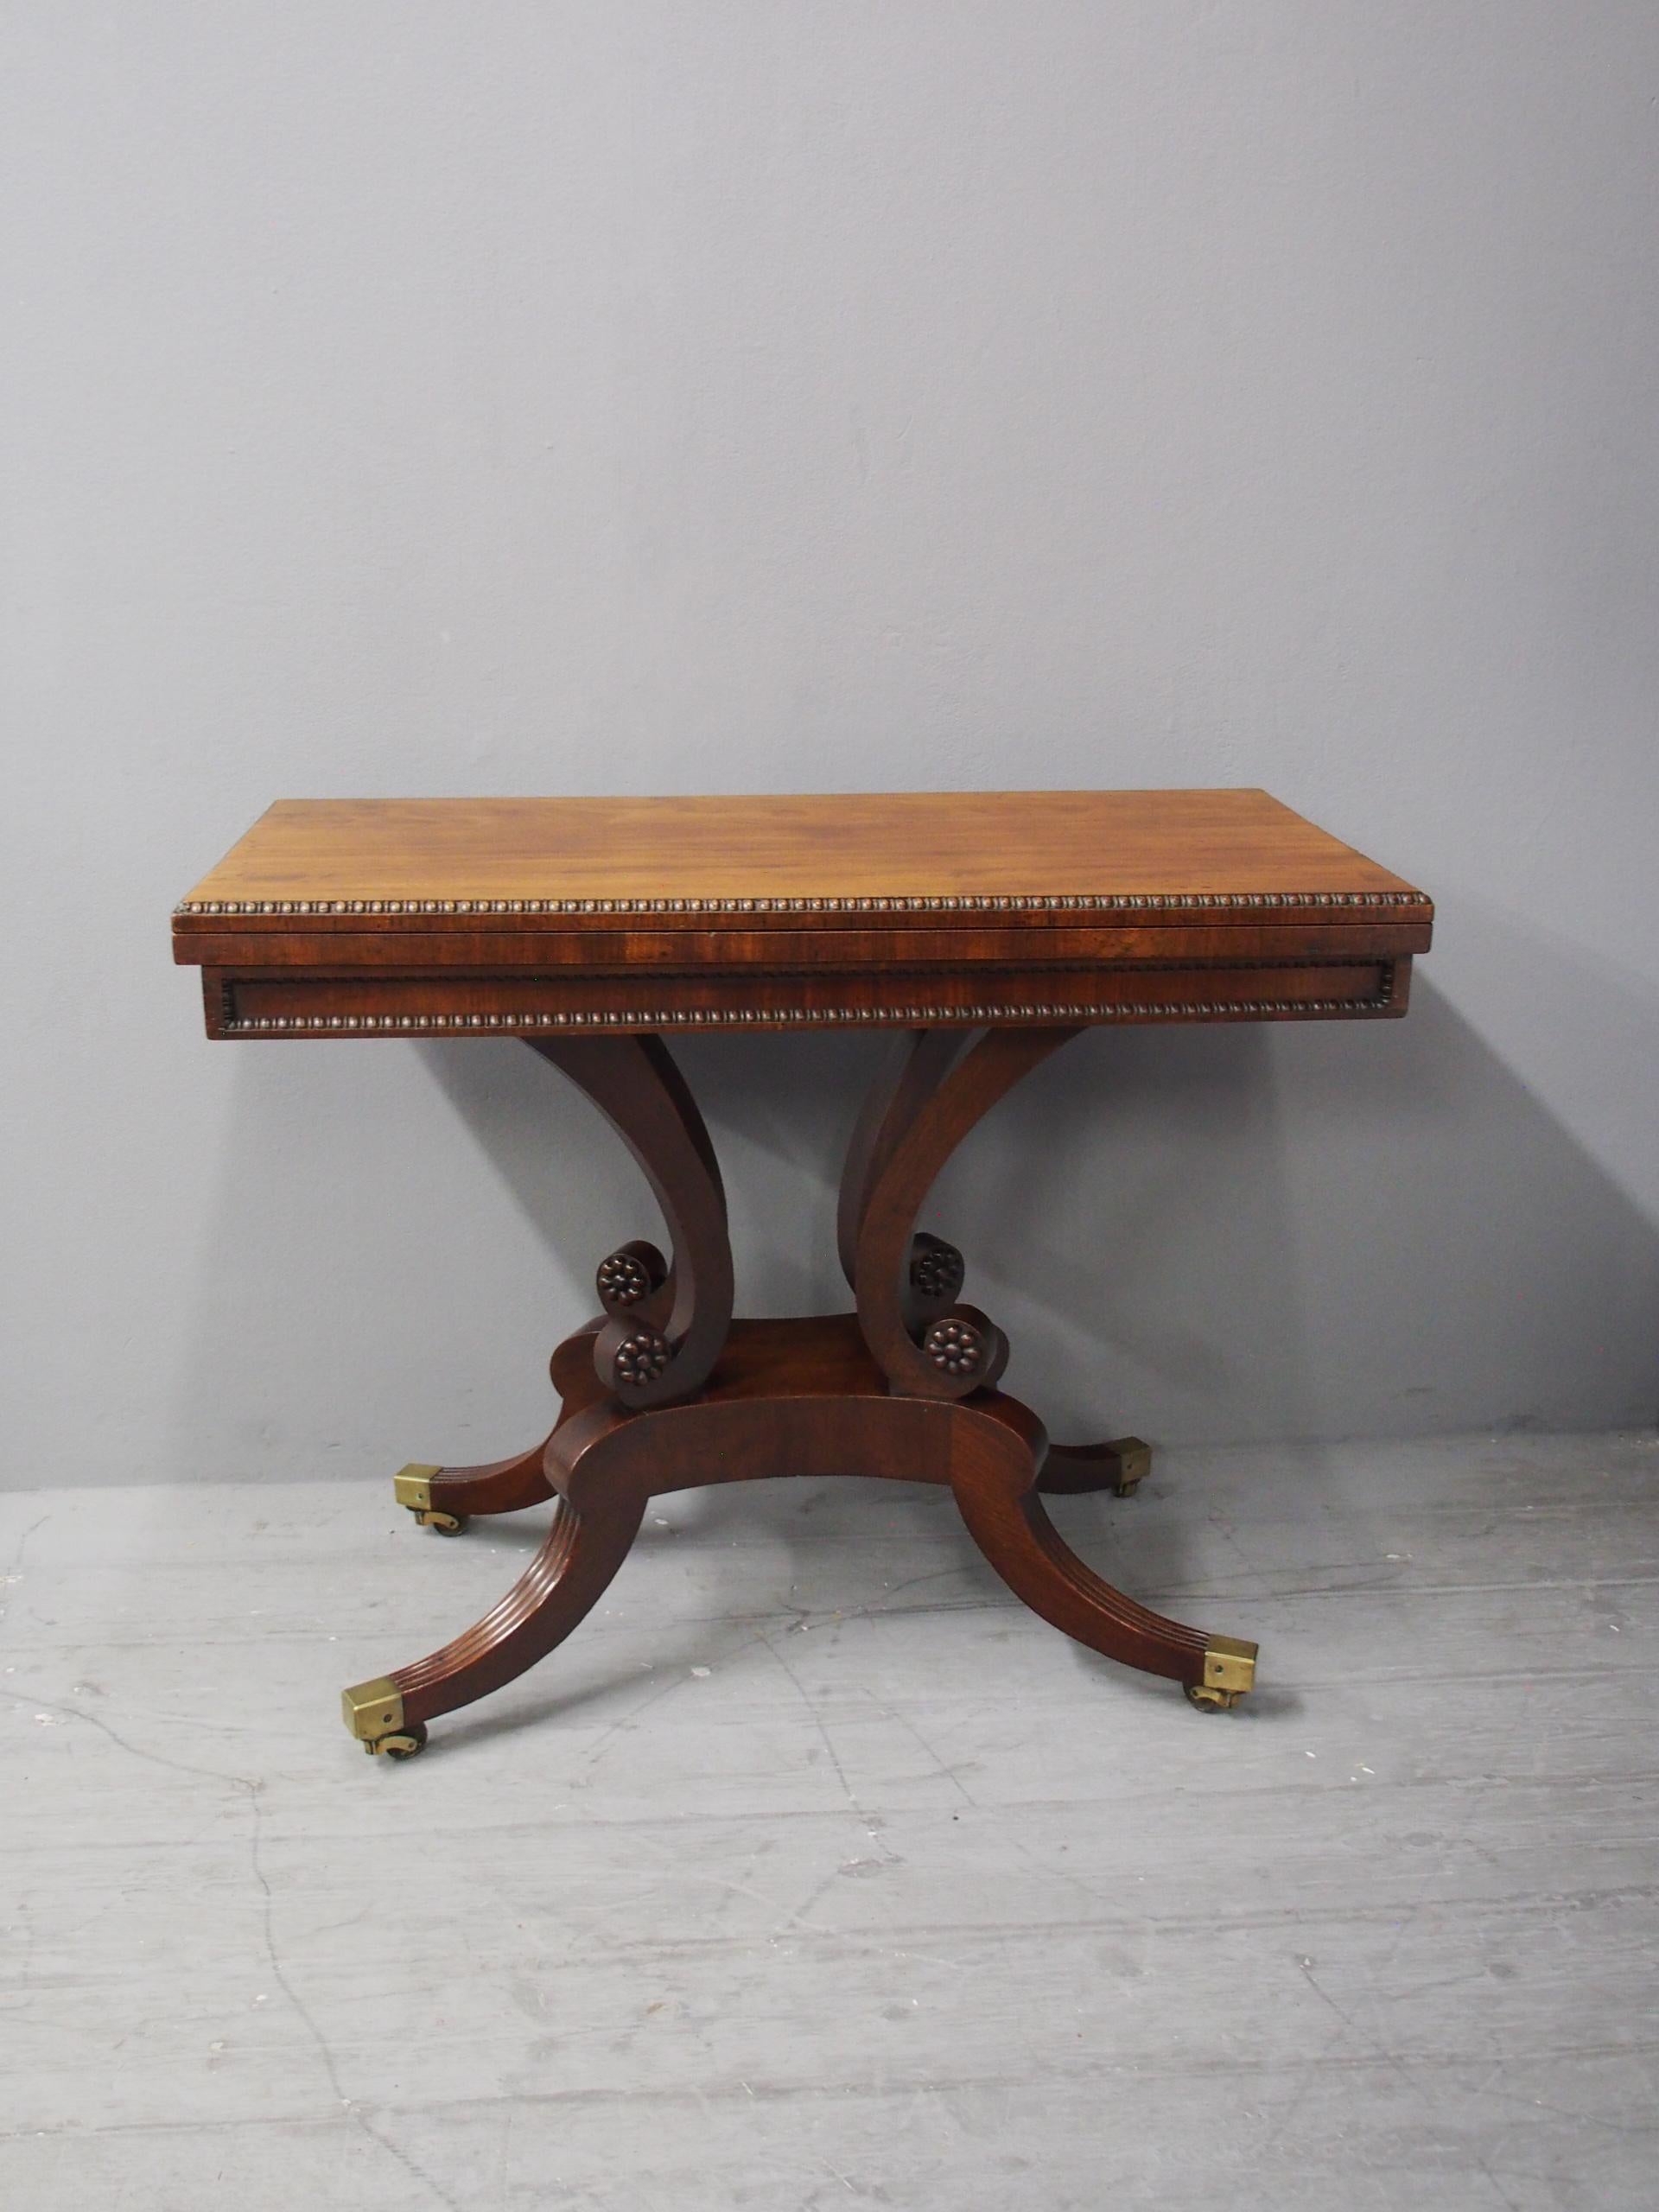 Regency mahogany tea table by William Trotter of Edinburgh. The rectangular fold over top has a beaded molded edge, and stands on the classic Trotter design, scrolling supports with carved rosettes on a quadriform base. This has hipped, reeded sabre